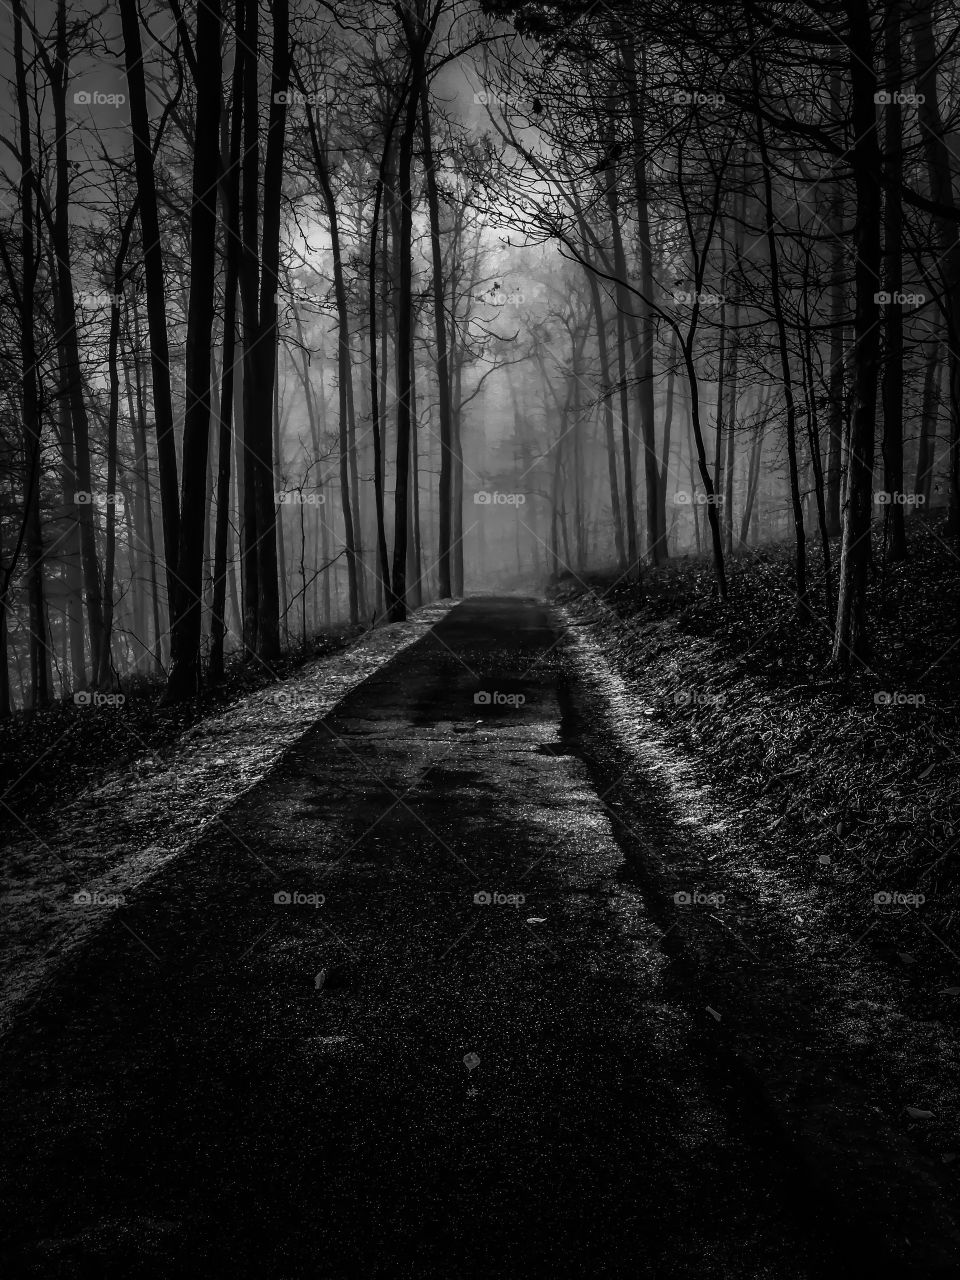 Dark spooky path through the foggy forest. Tims Ford State Park, Winchester, Tennessee. 